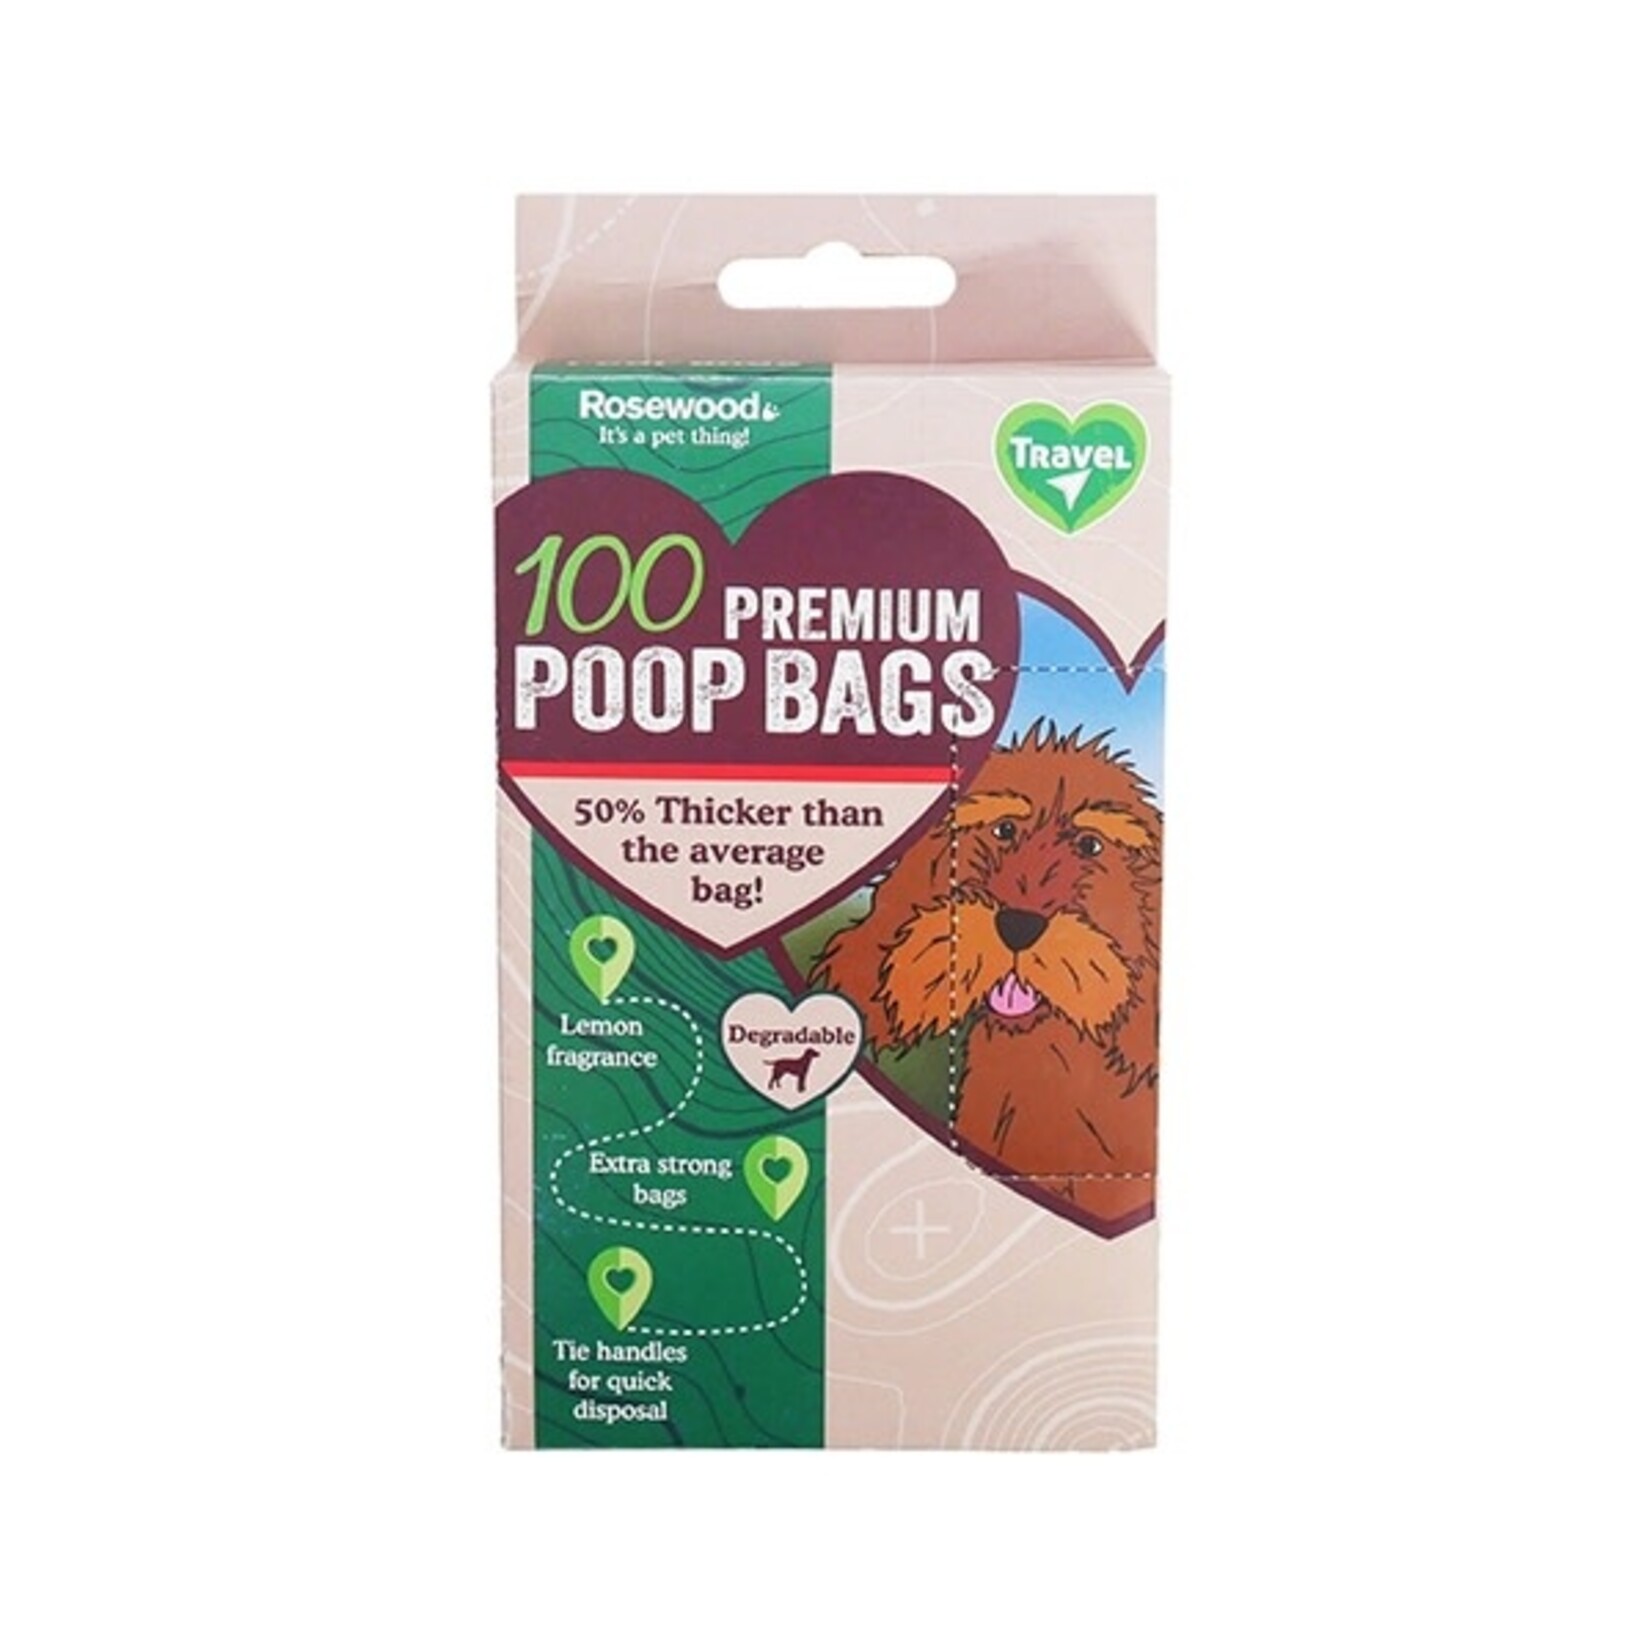 Rosewood Degradable Doggy Bags Lemon Scented, 100 pack